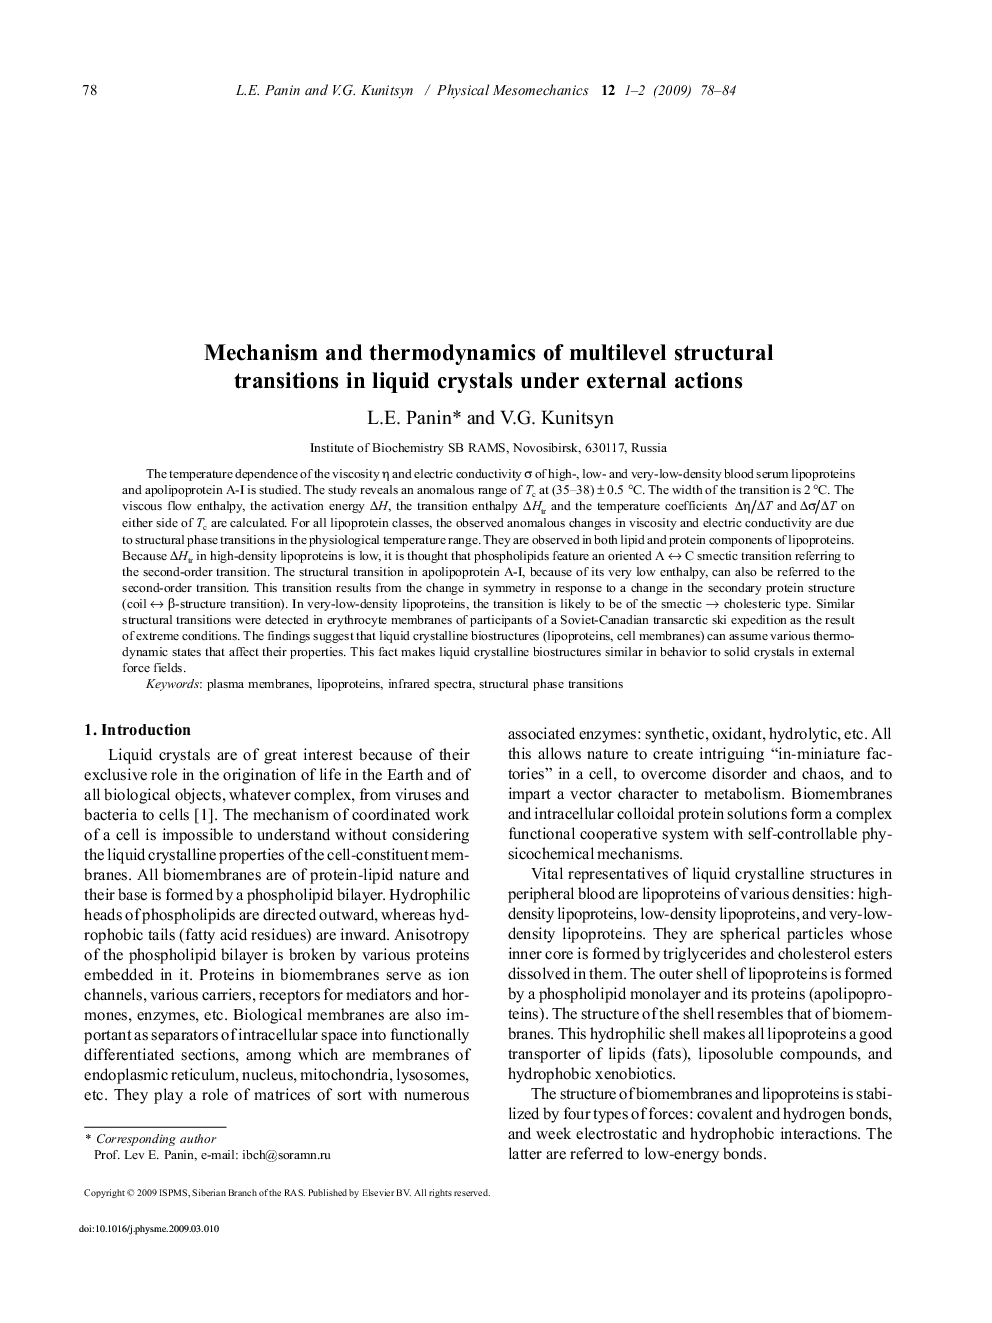 Mechanism and thermodynamics of multilevel structural transitions in liquid crystals under external actions